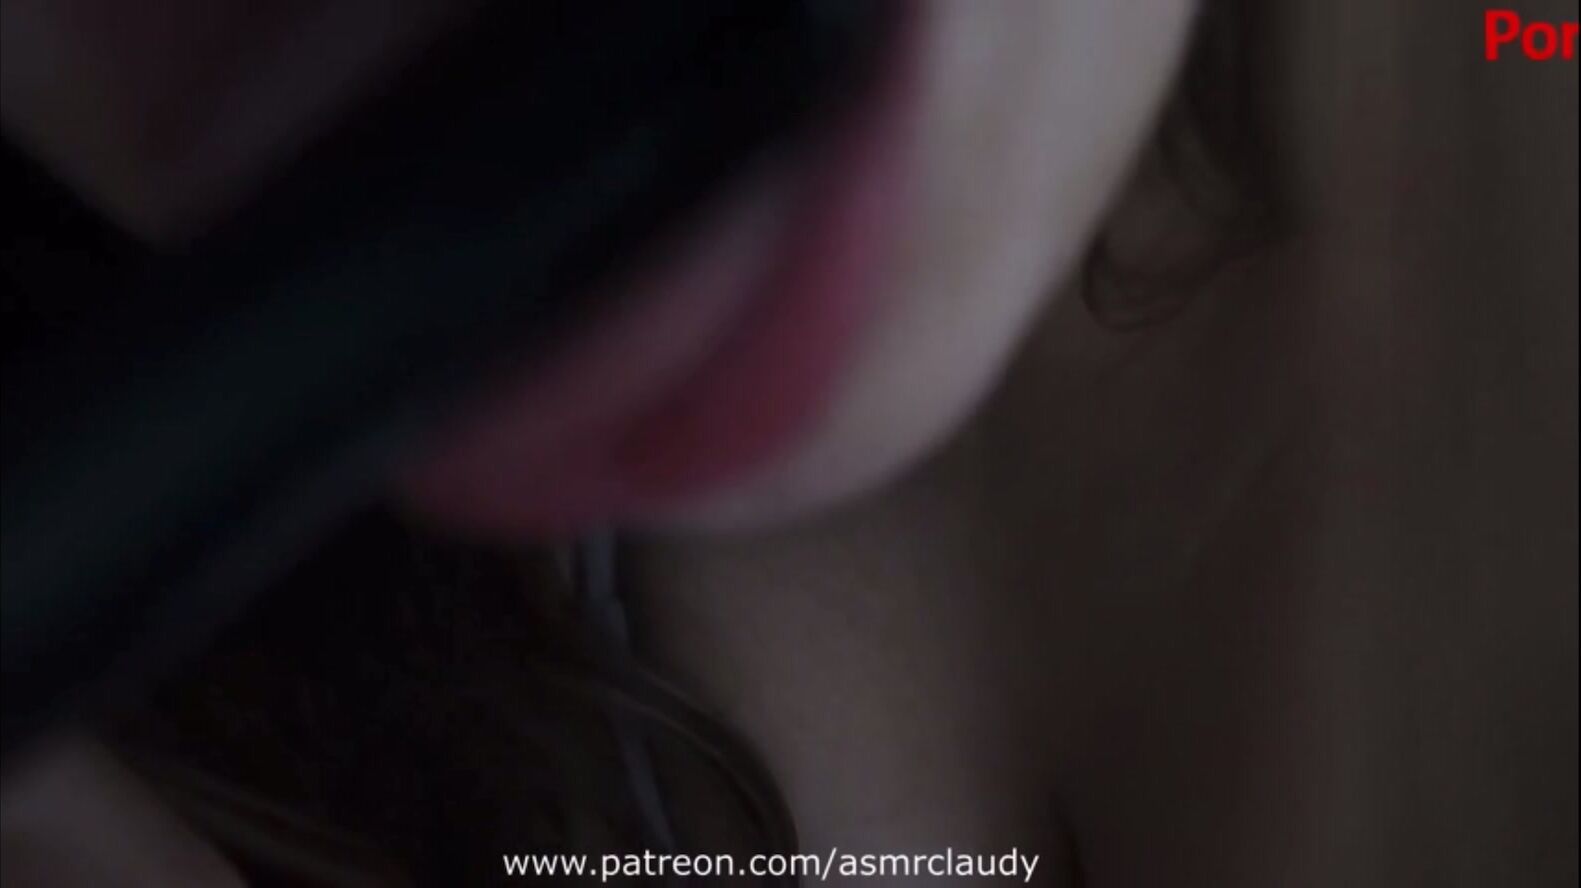 asmr claudy ppv mouth sounds